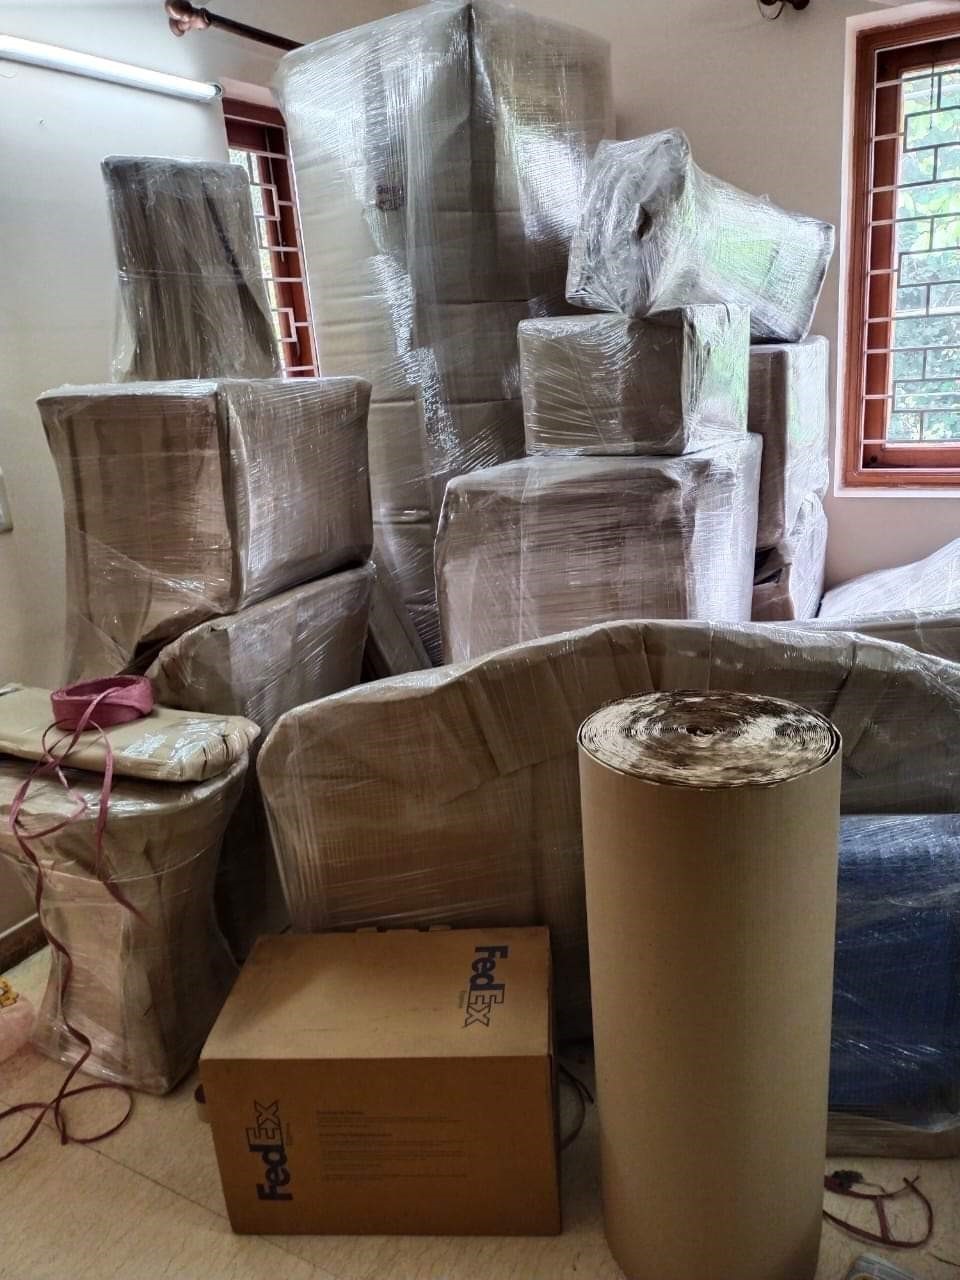 Rehousing packers and movers from Delhi transportation services image in Guwahati office